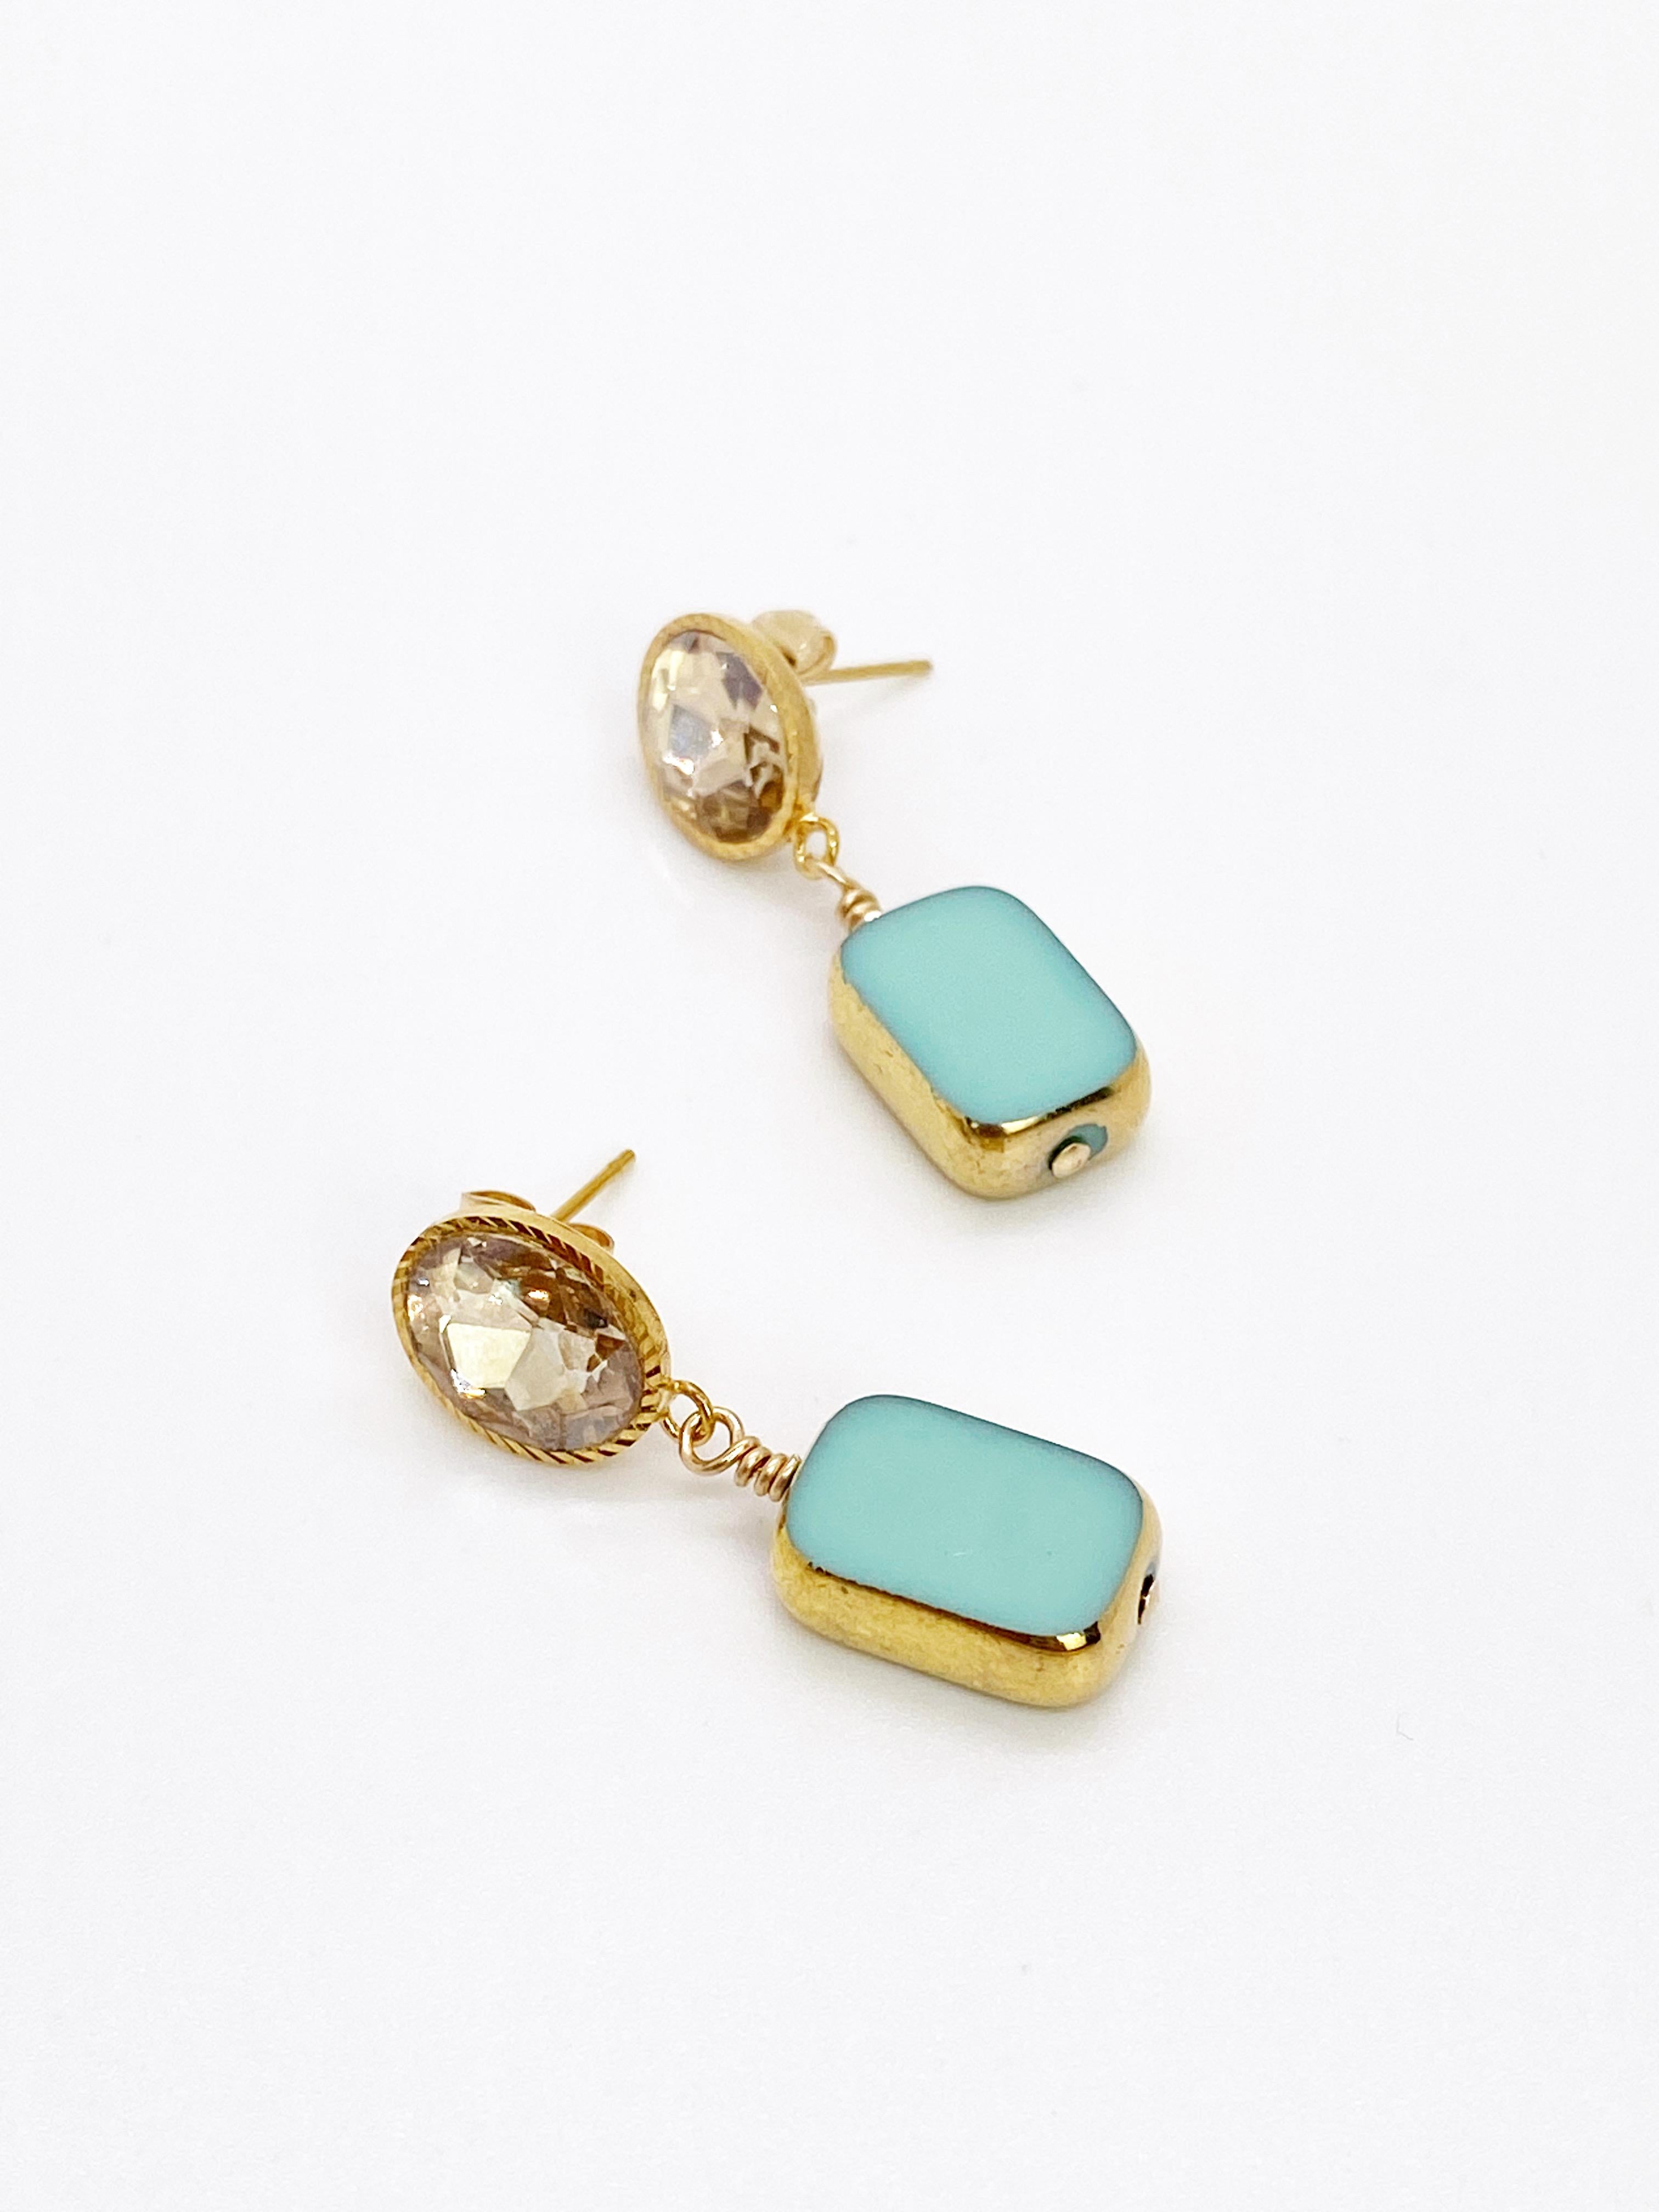 Vintage German Glass Beads edged with 24K gold, Sea Foam Green Earrings In New Condition For Sale In Monrovia, CA